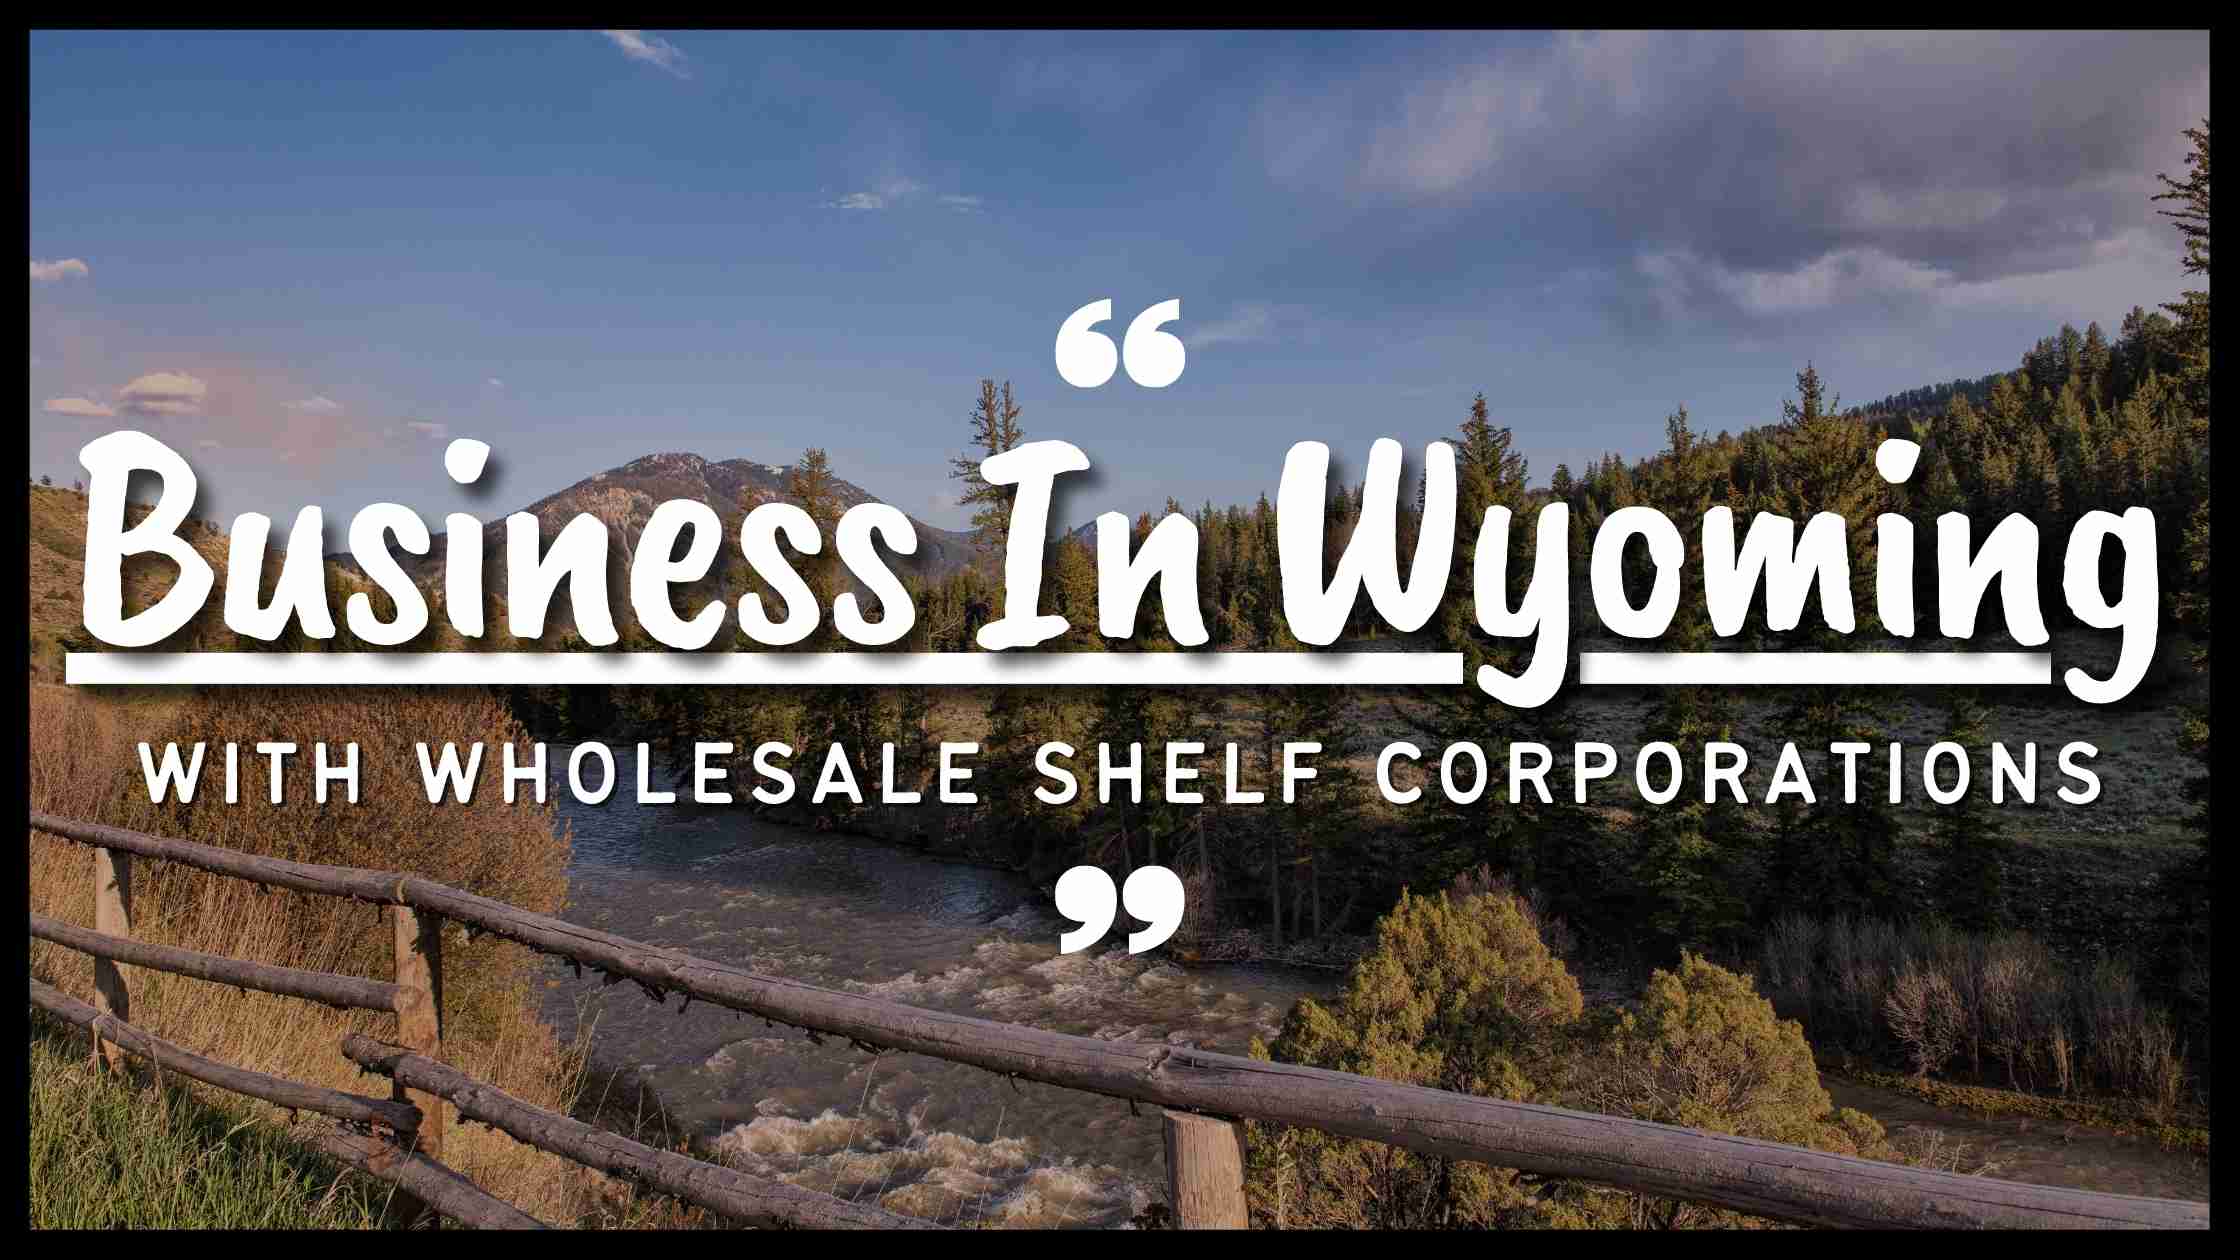 It is now a lot easier to start a business in Wyoming with Wholesale Shelf Corporations.